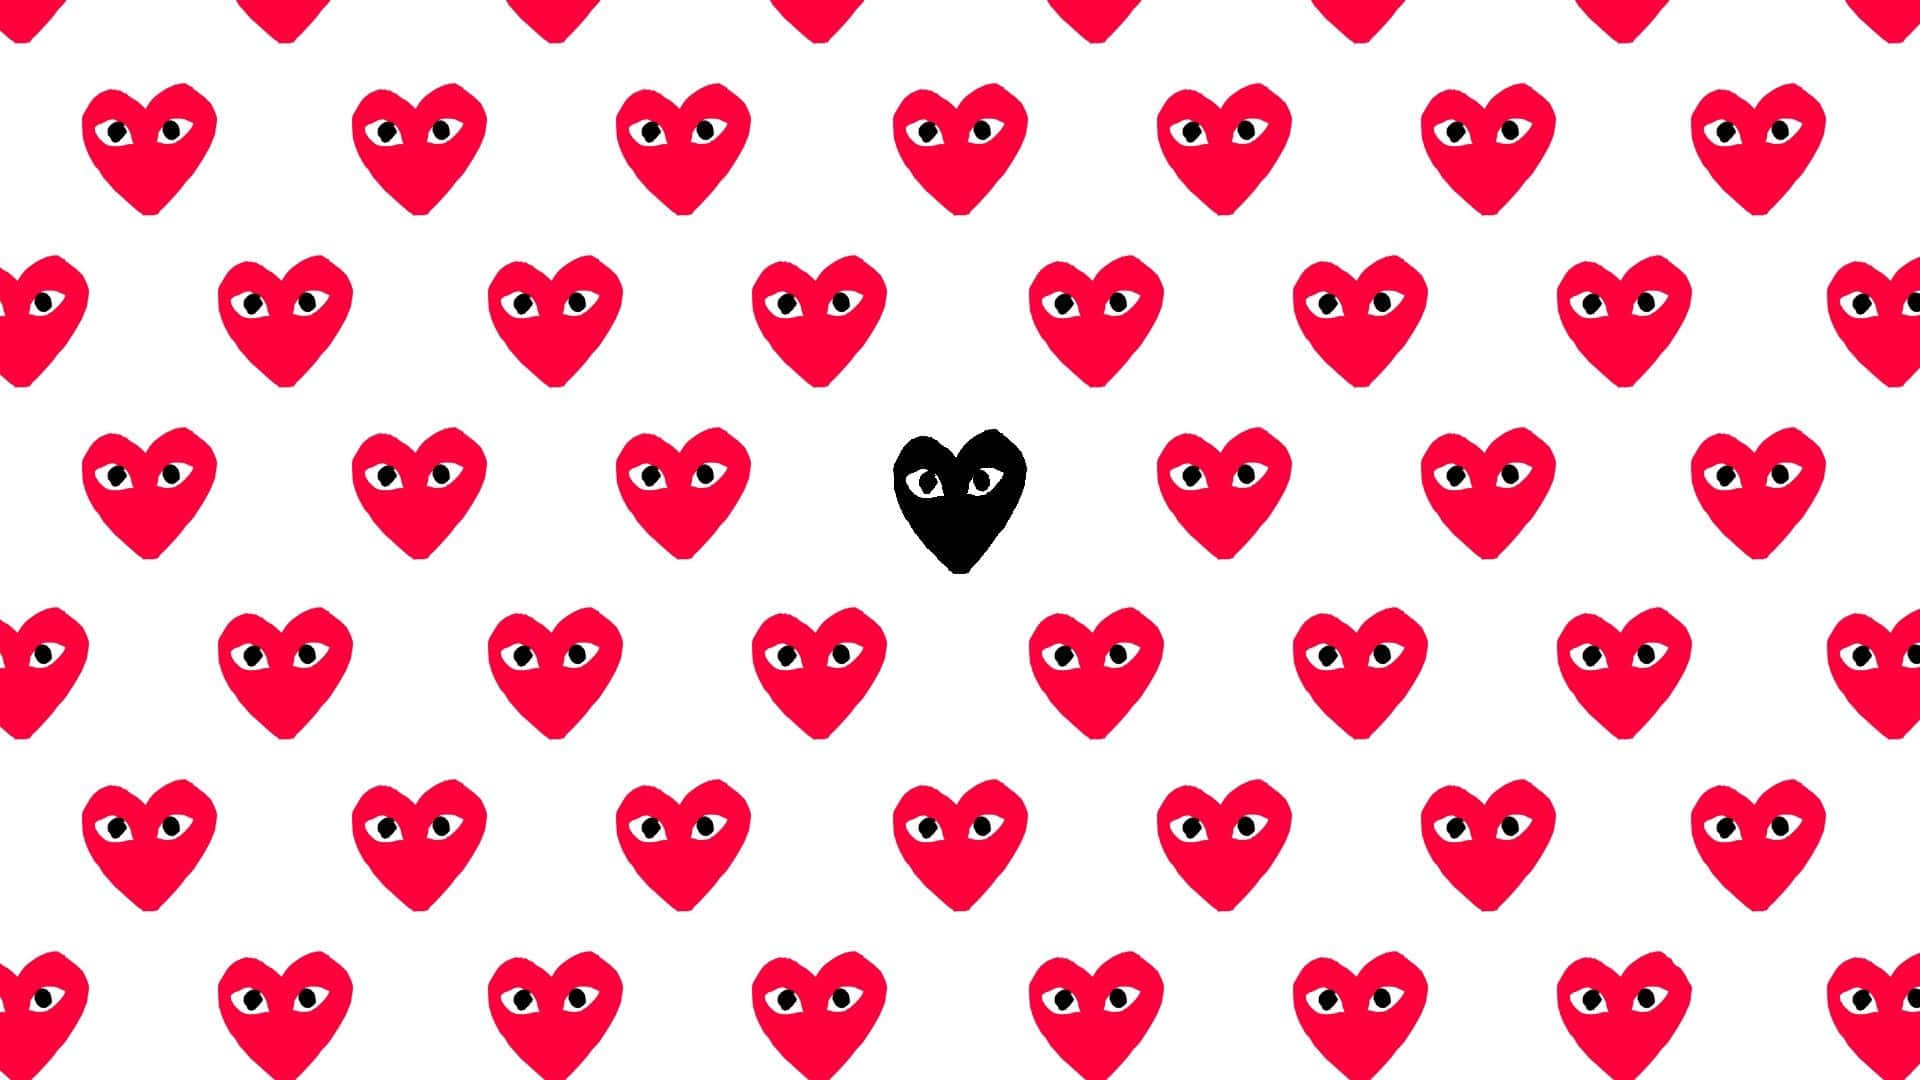 Heart With Eyes Wallpapers - Wallpaper Cave